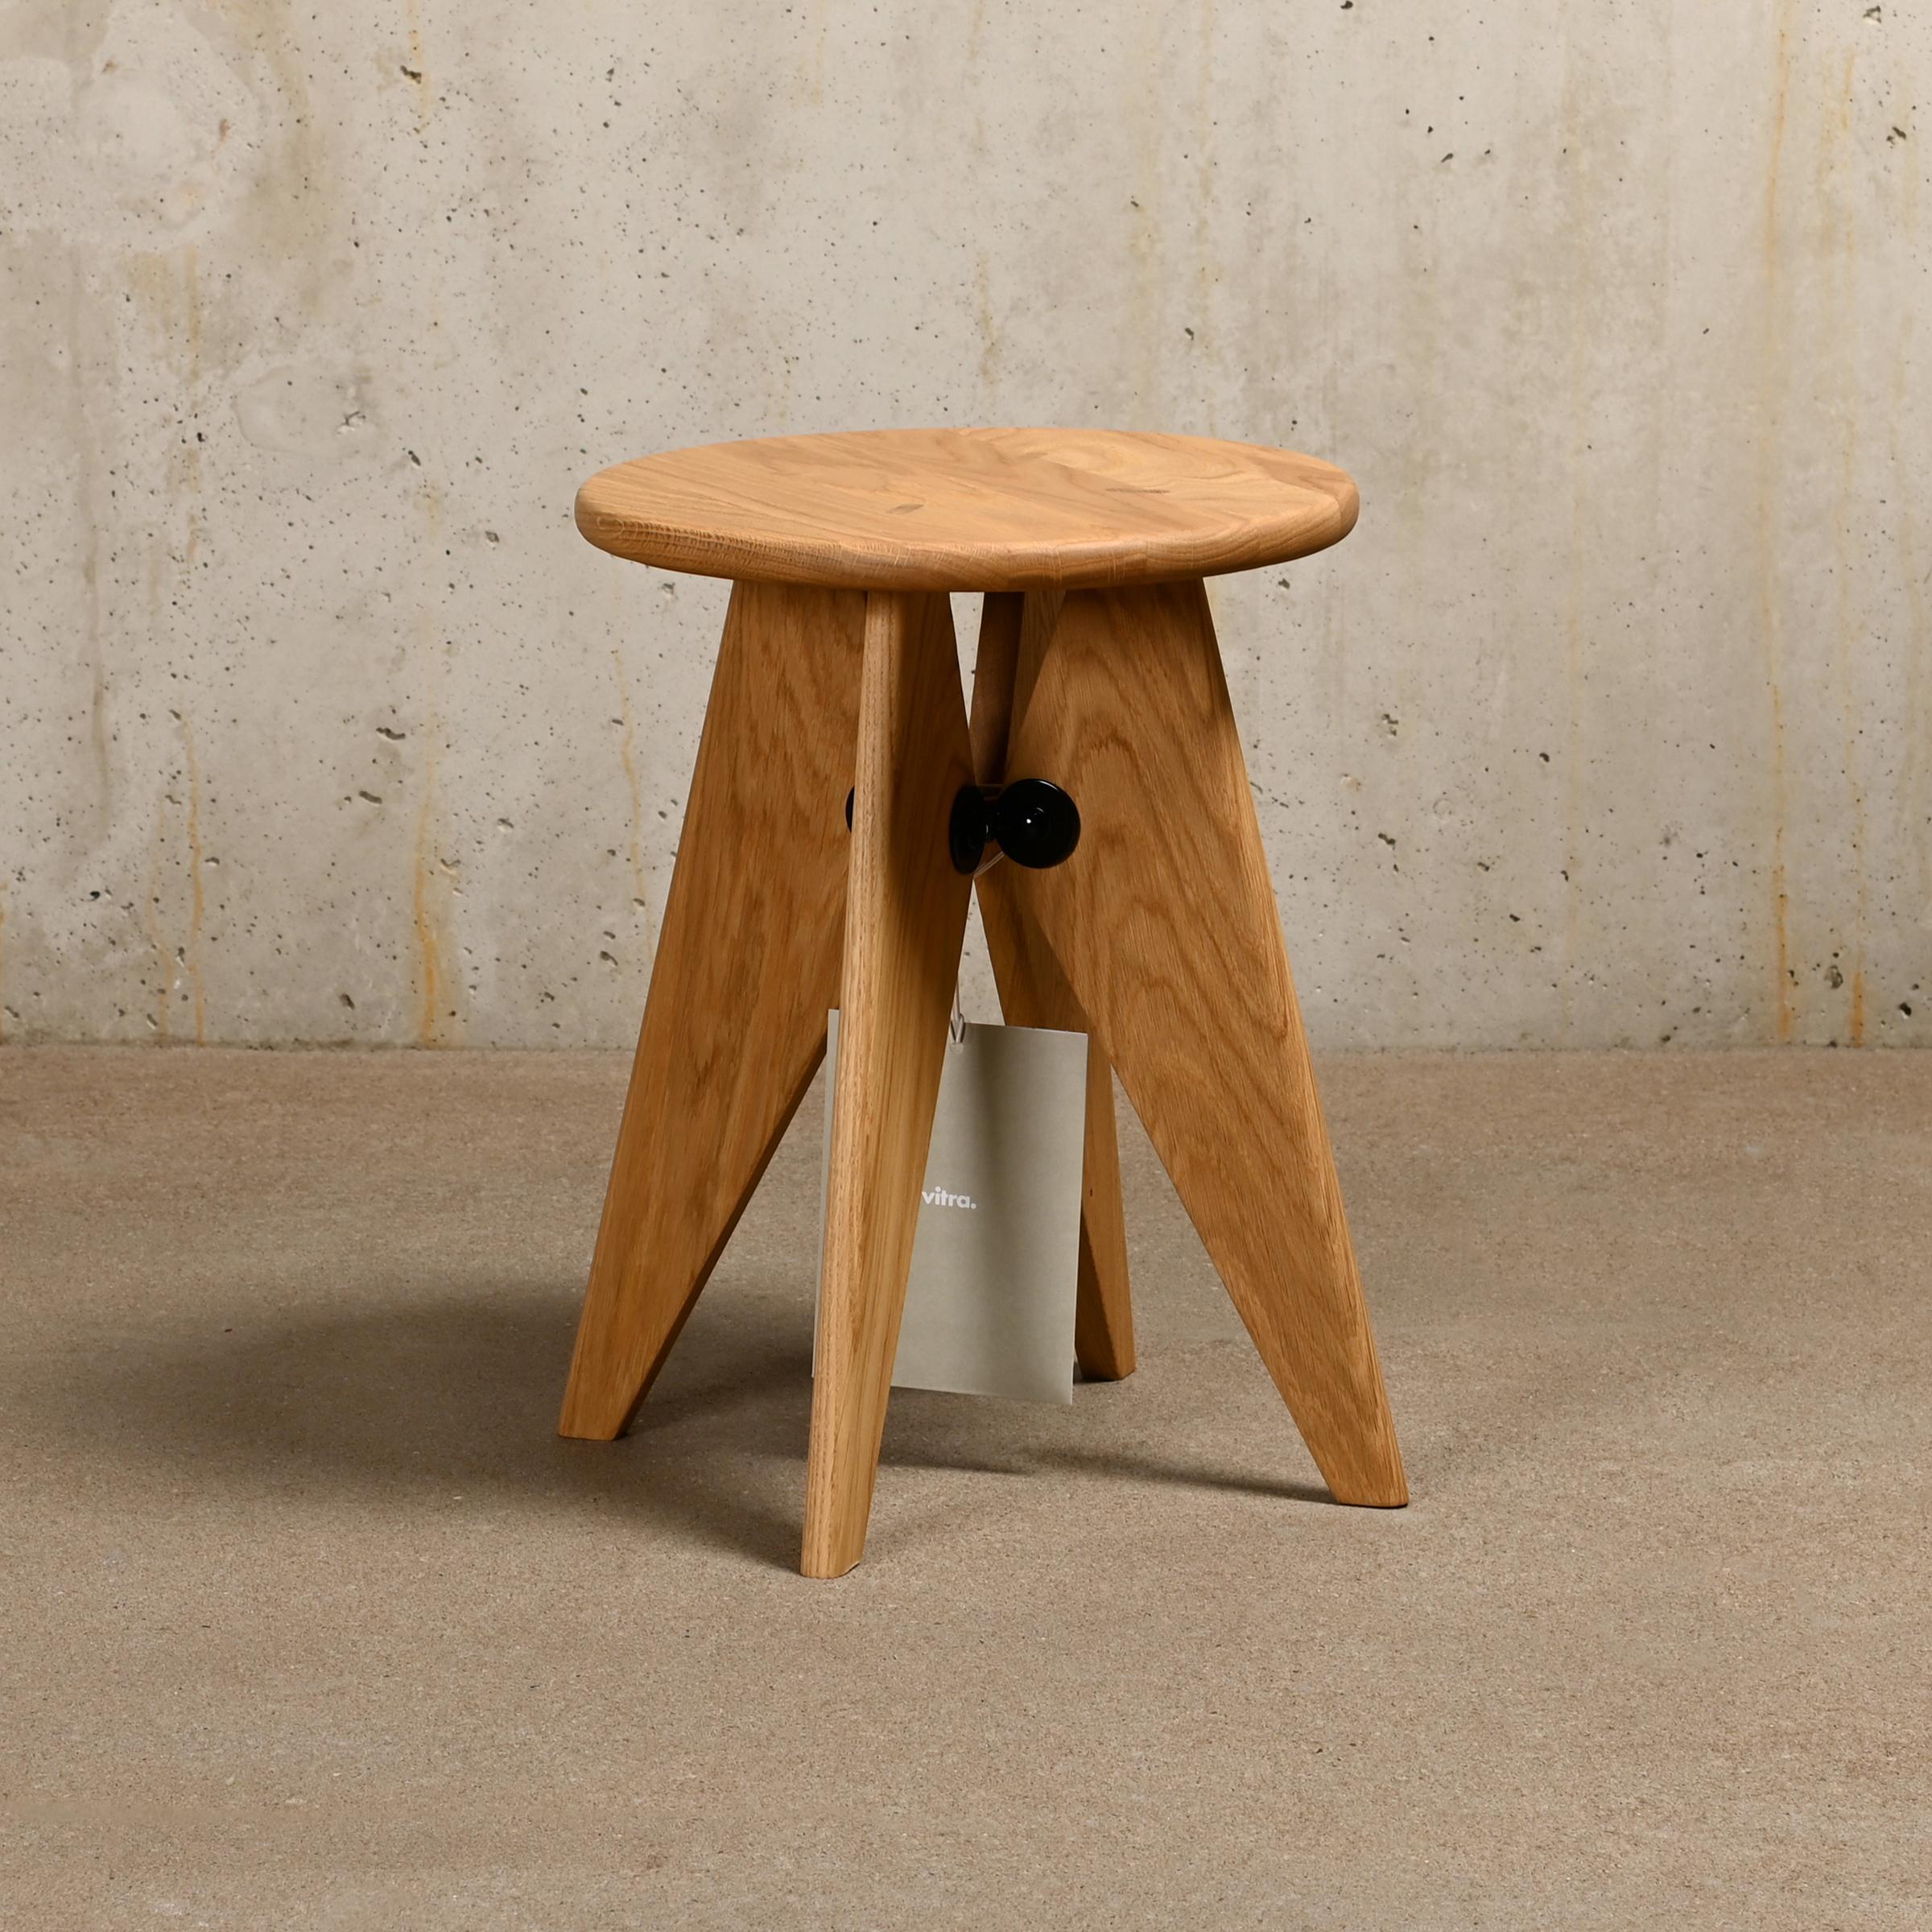 German Jean Prouvé Tabouret Solvay / Bois Stool in Solid Natural Oak by Vitra For Sale